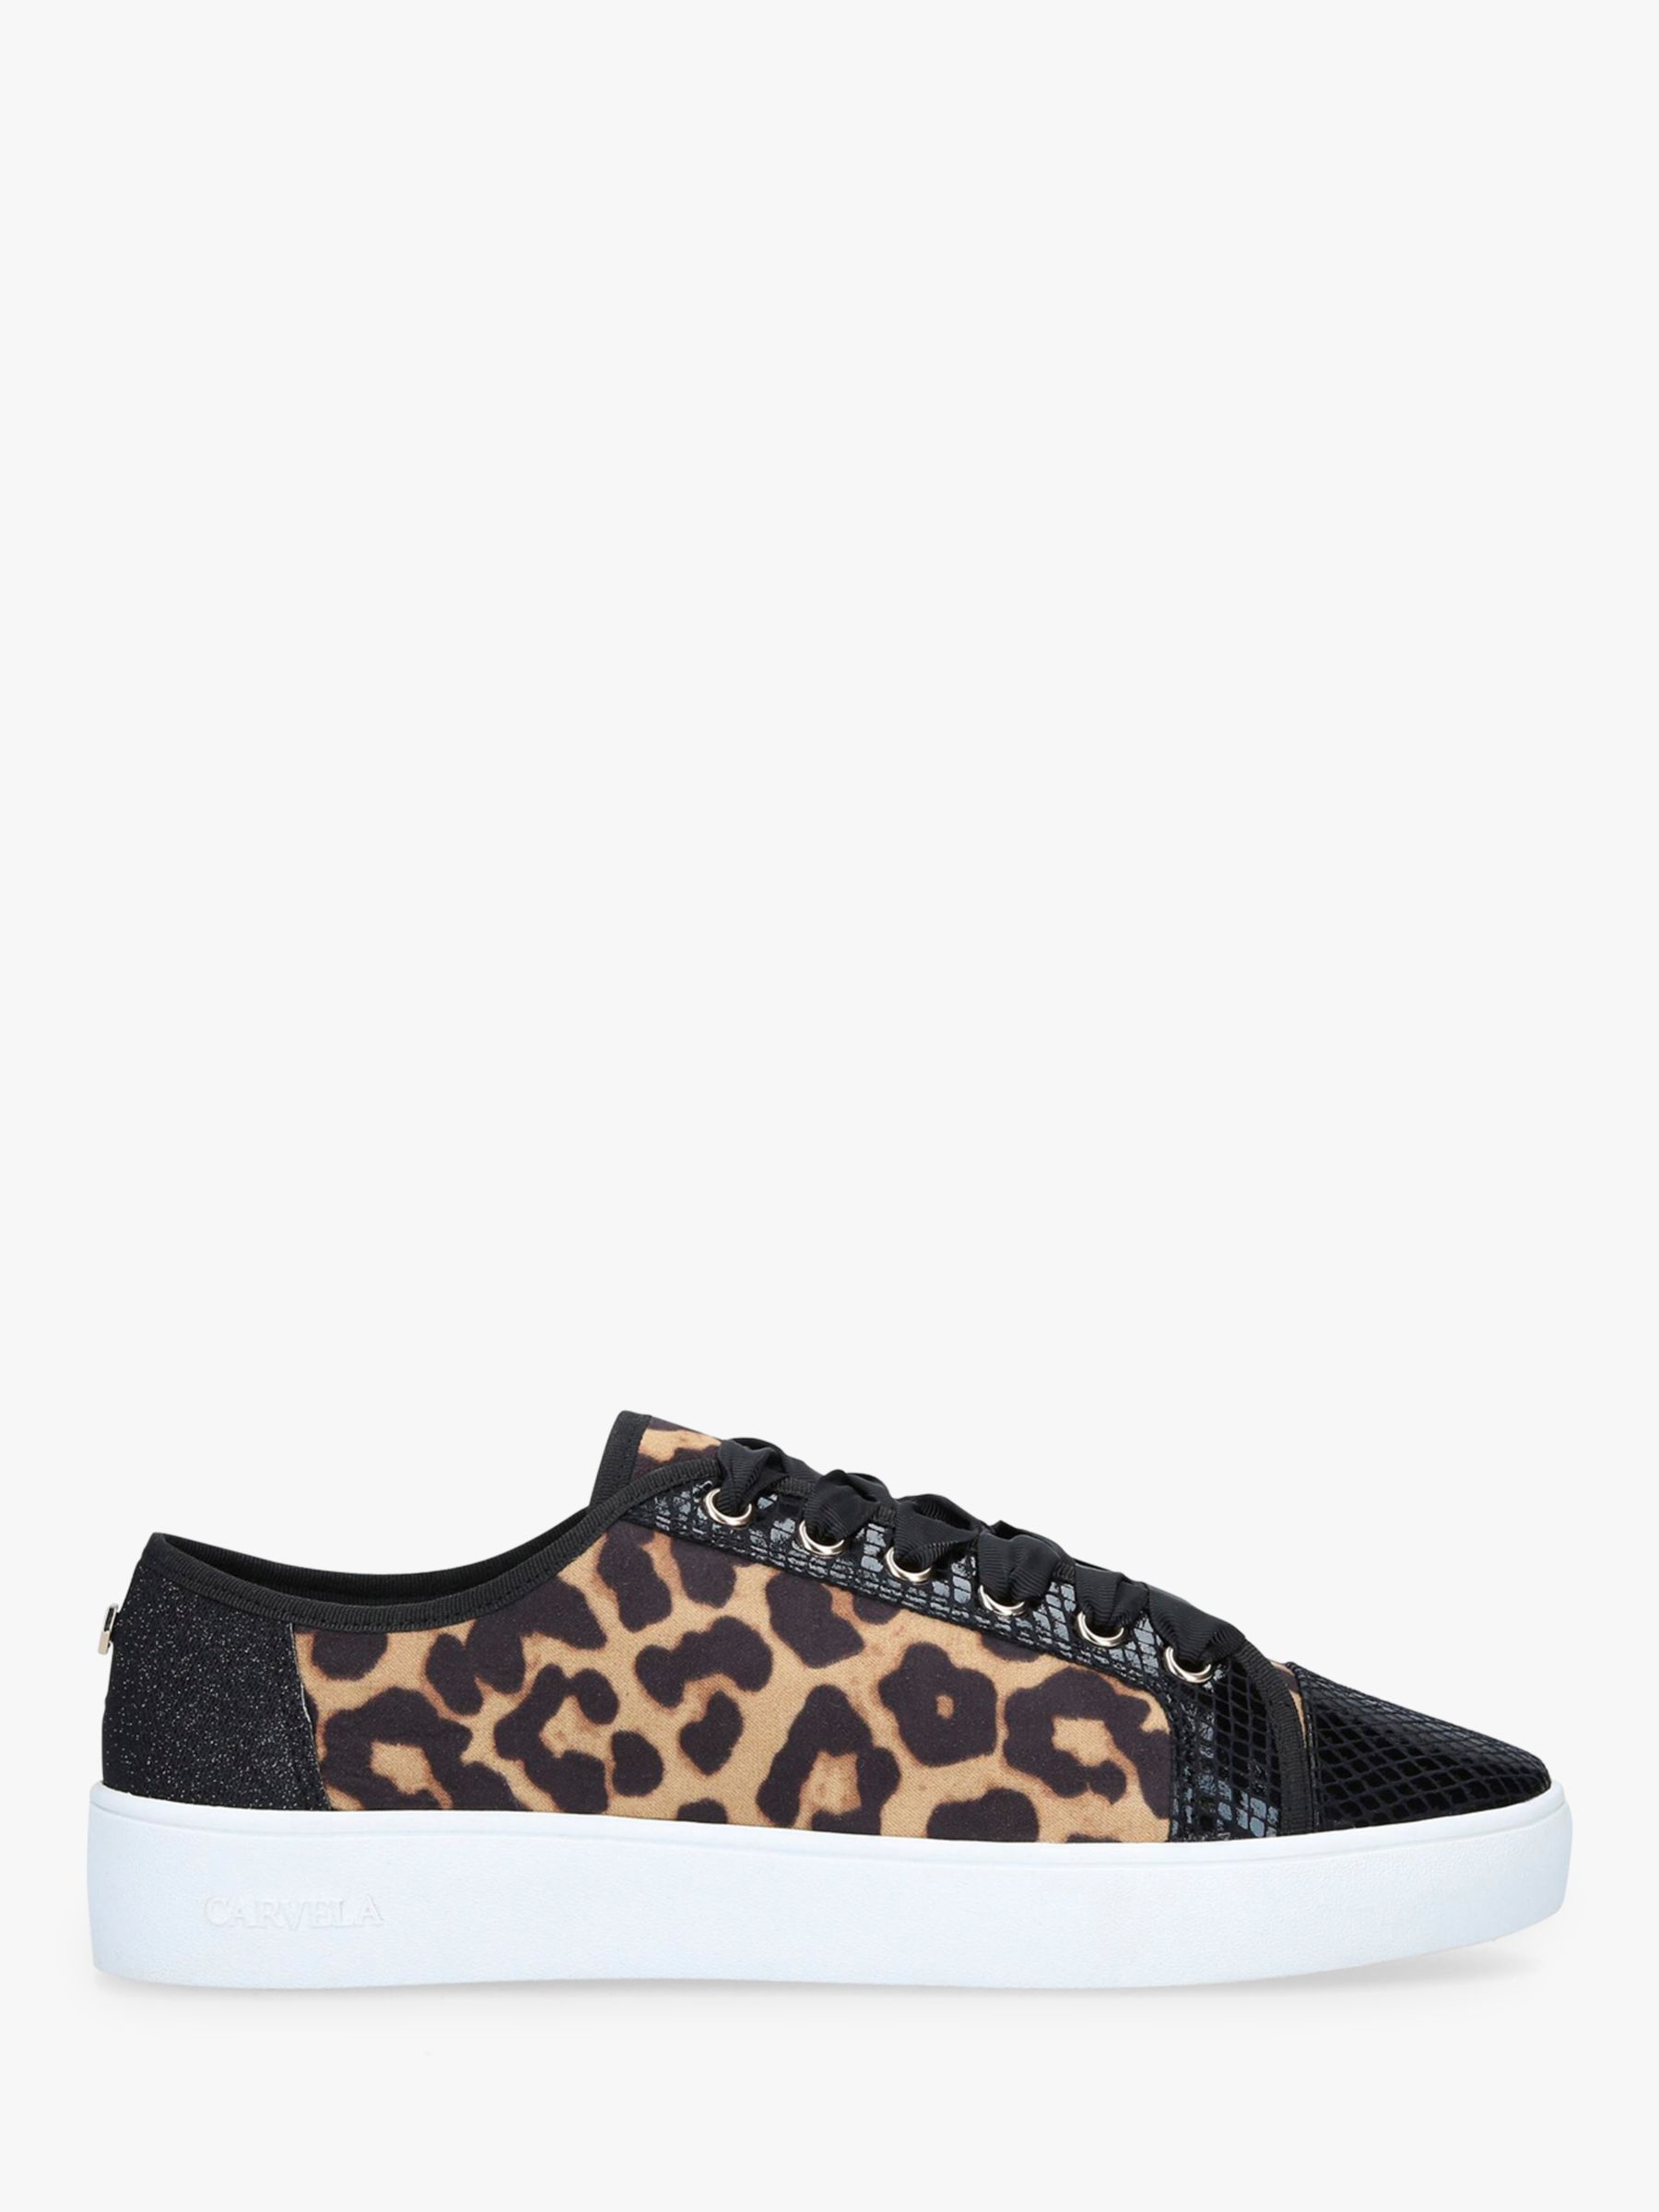 Carvela Jigsaw Suede Leopard Print Lace Up Trainers, Brown, 3